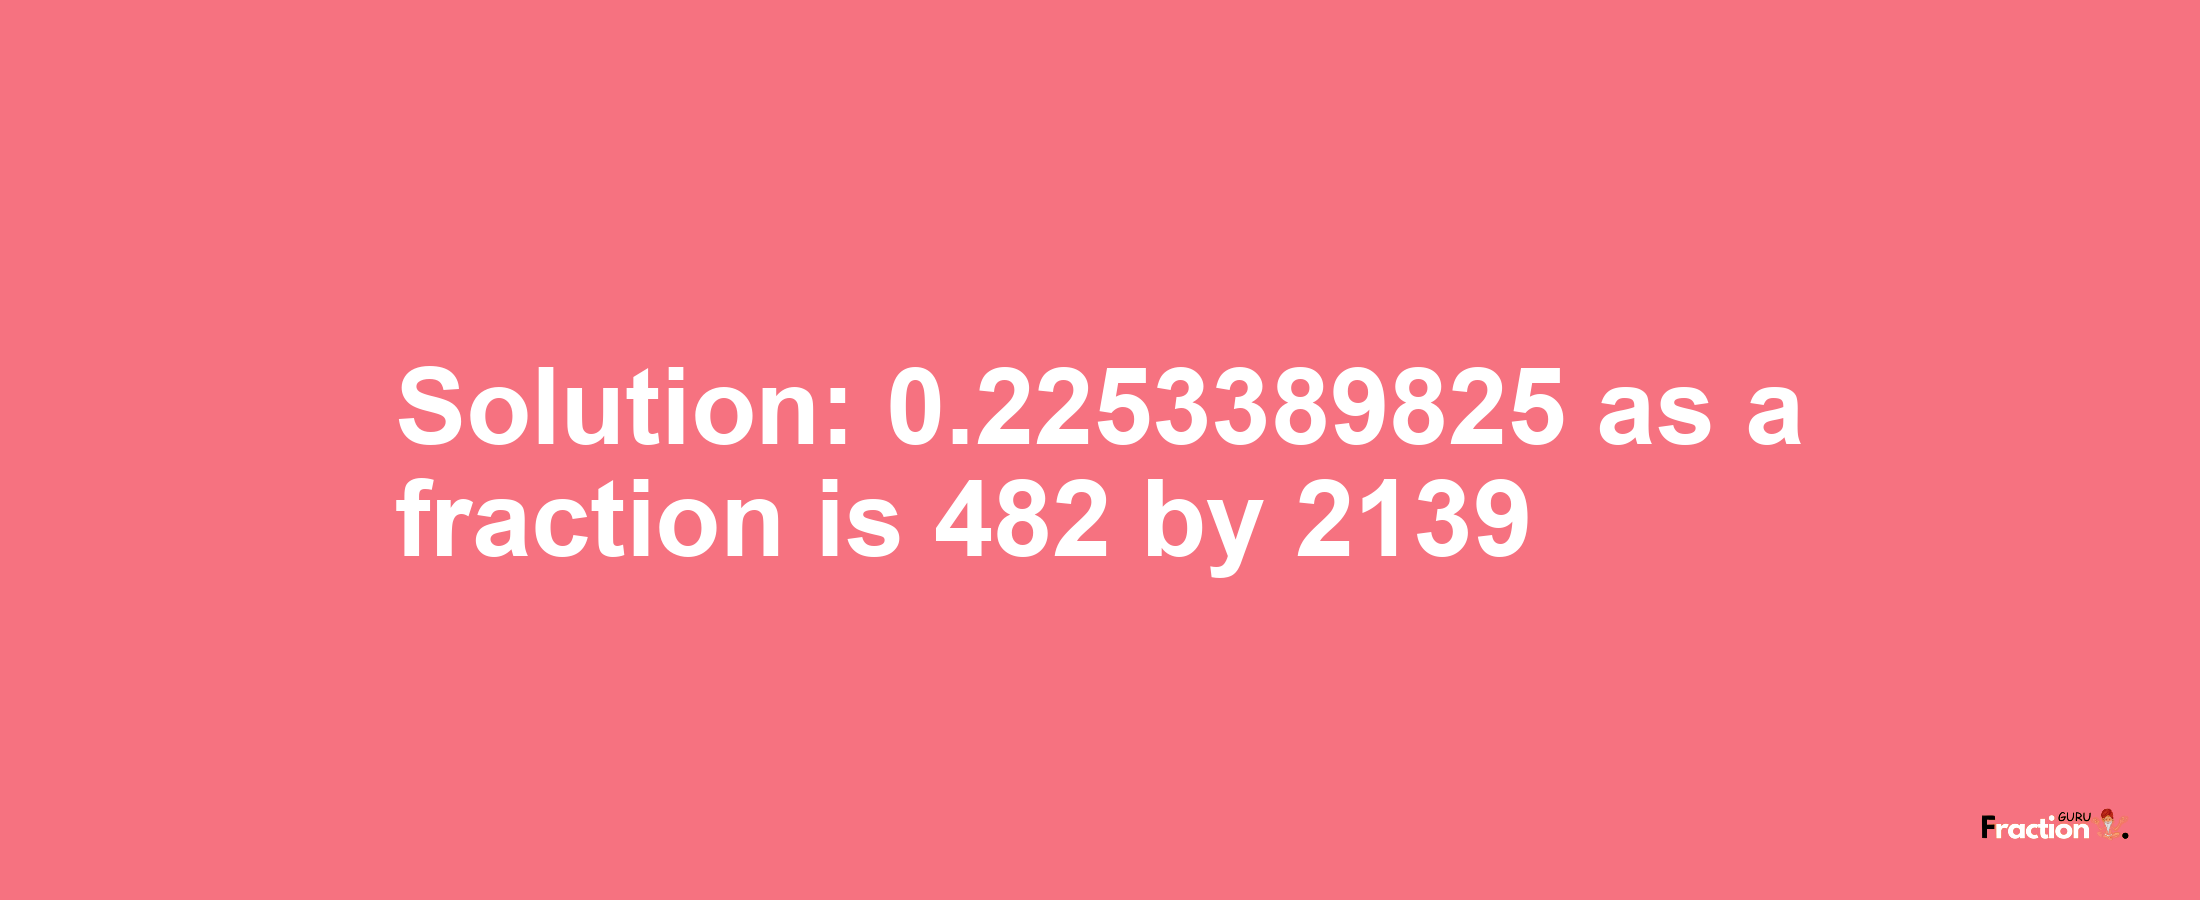 Solution:0.2253389825 as a fraction is 482/2139